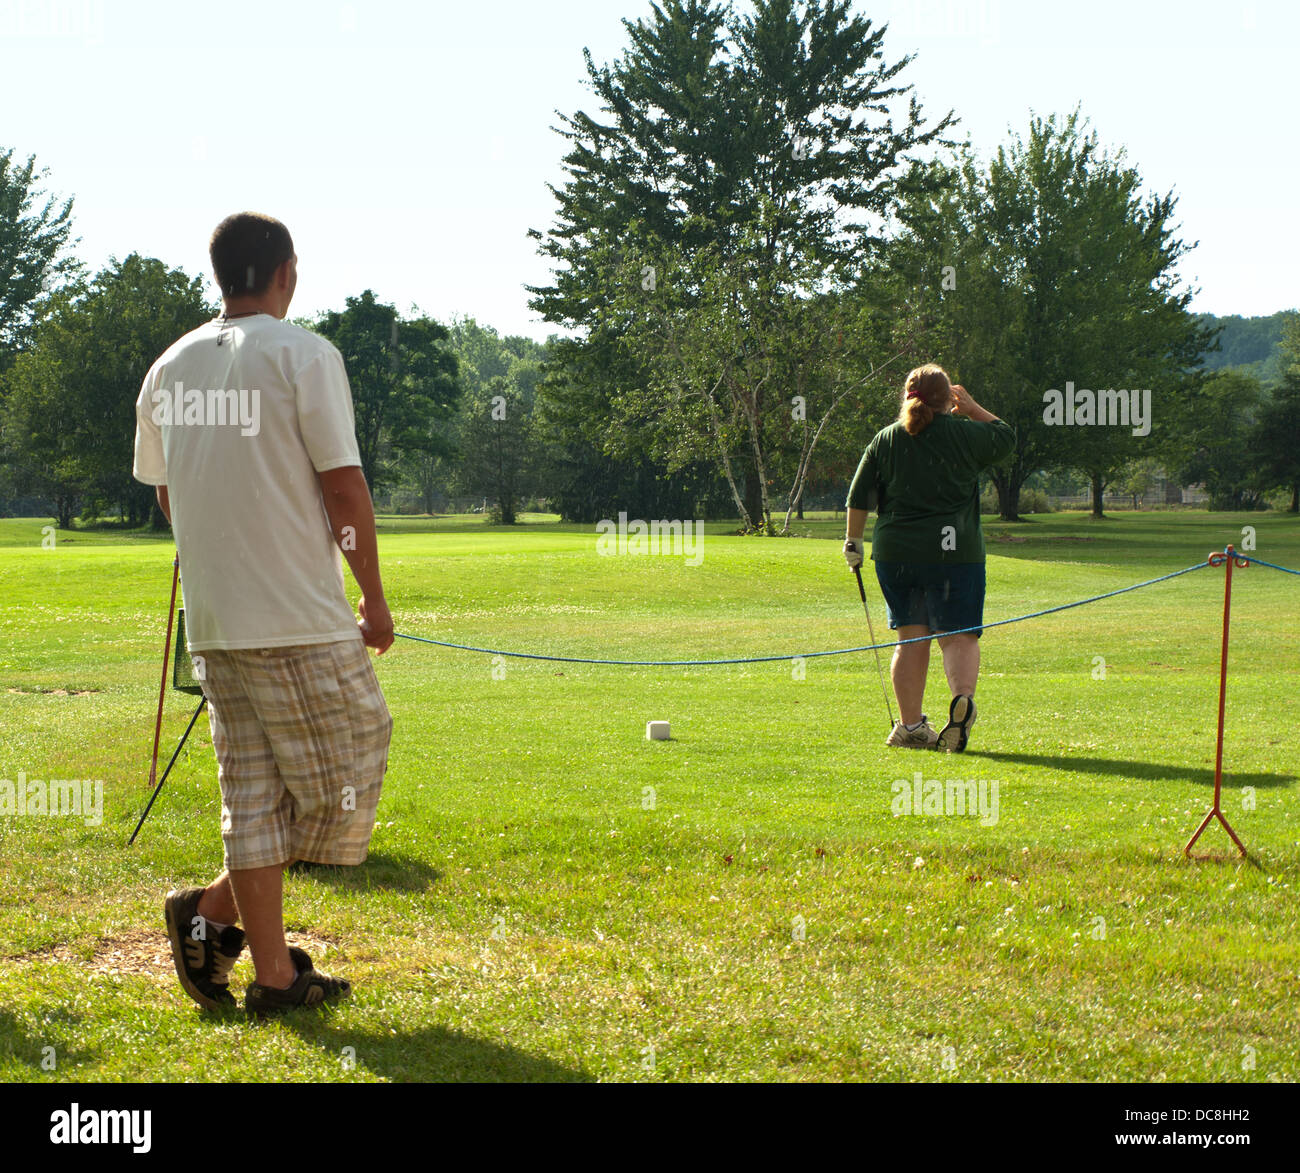 people beginning a game of golf Stock Photo